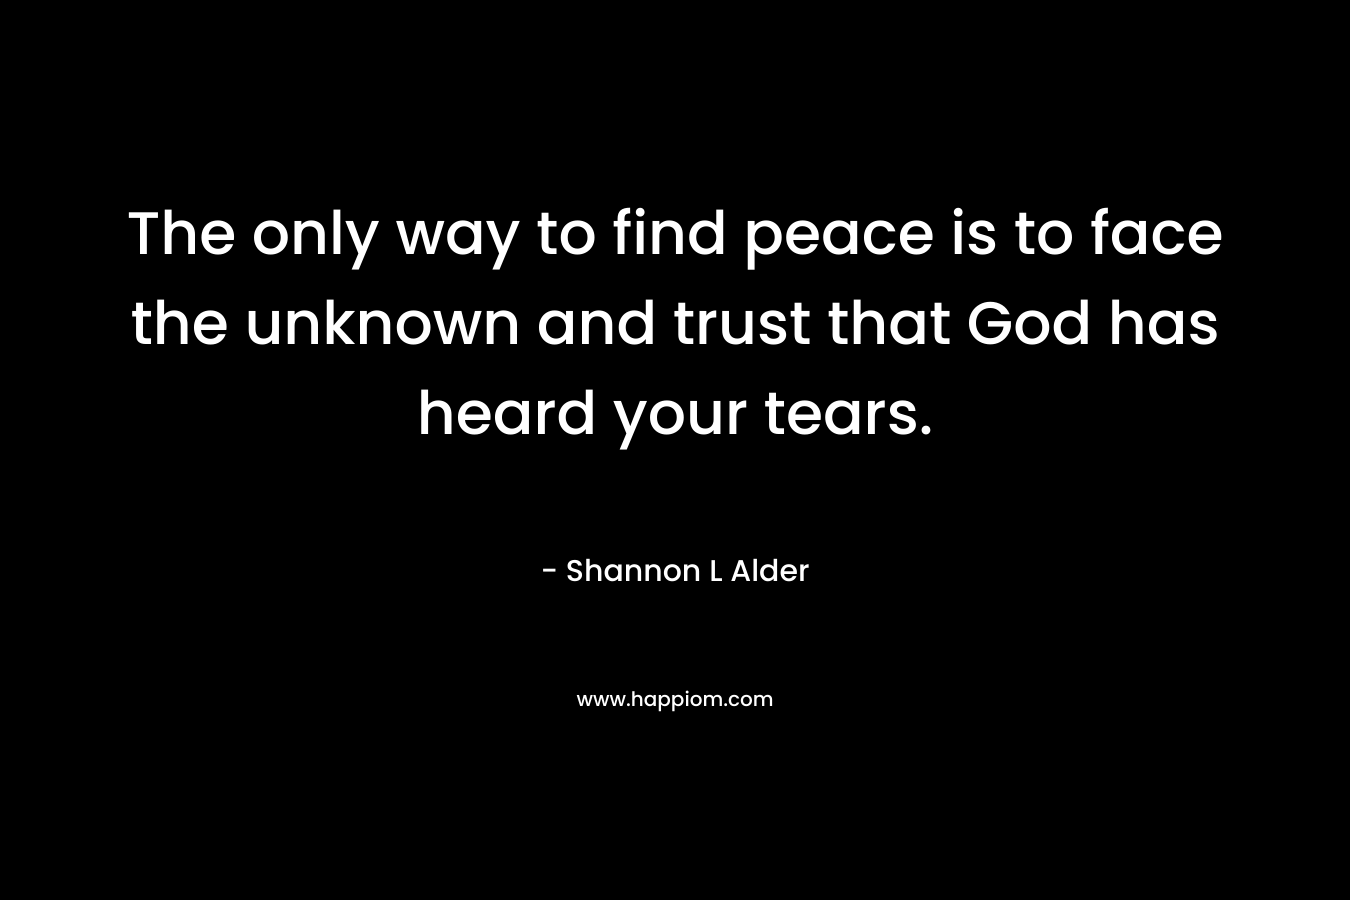 The only way to find peace is to face the unknown and trust that God has heard your tears.